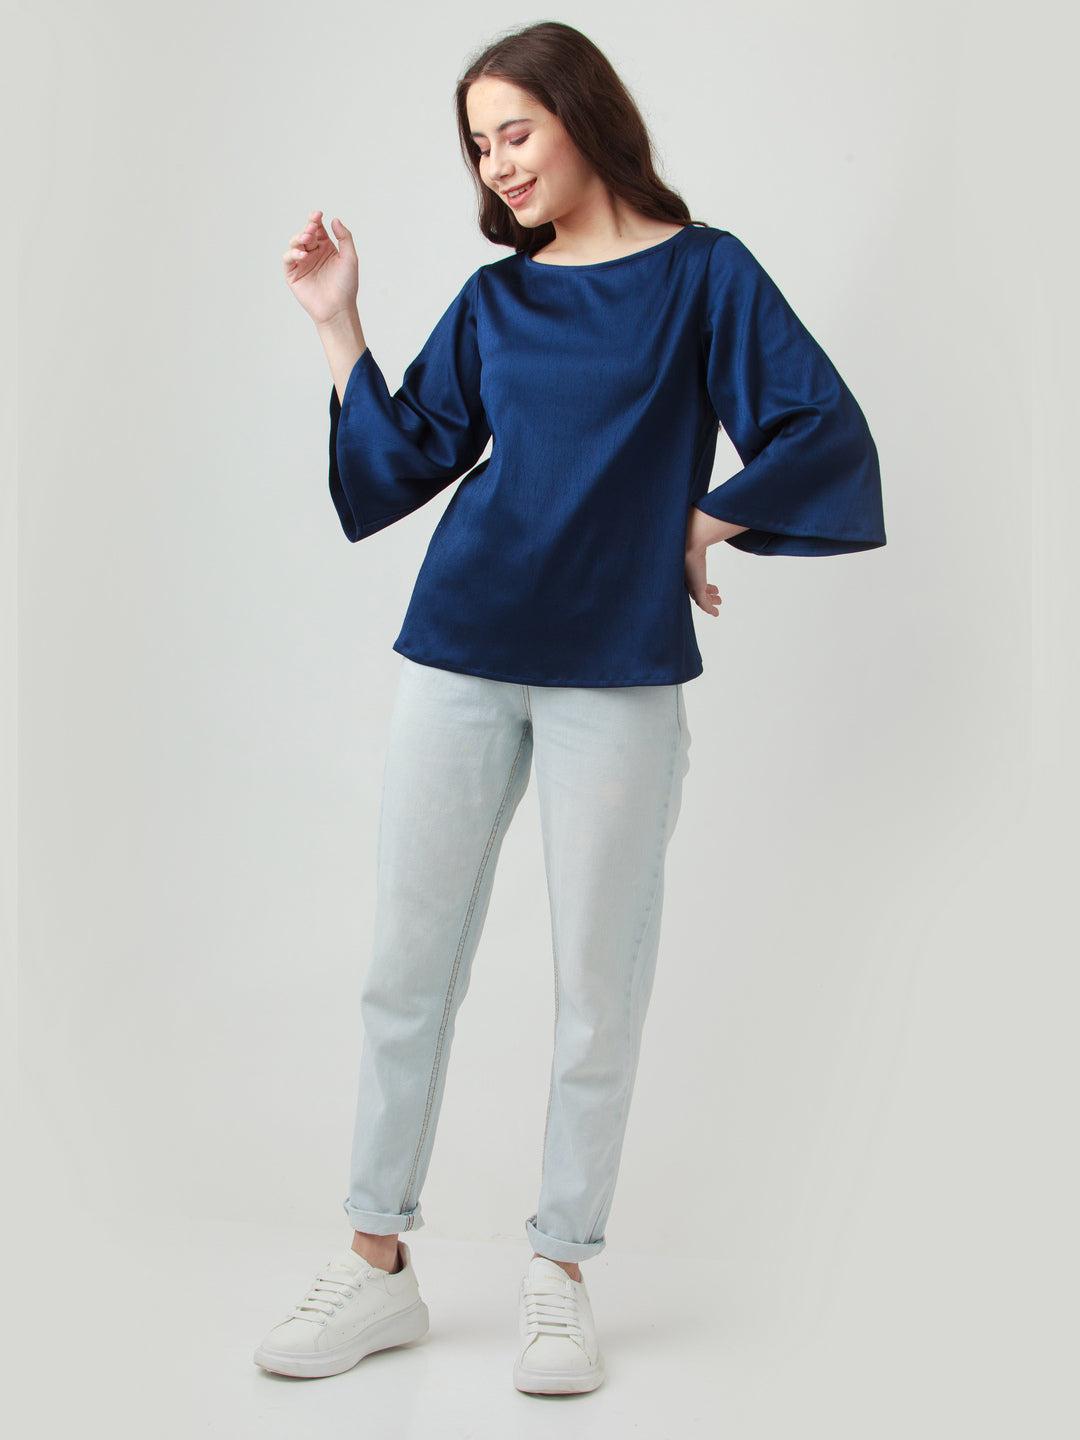 Navy Blue Solid Top For Women